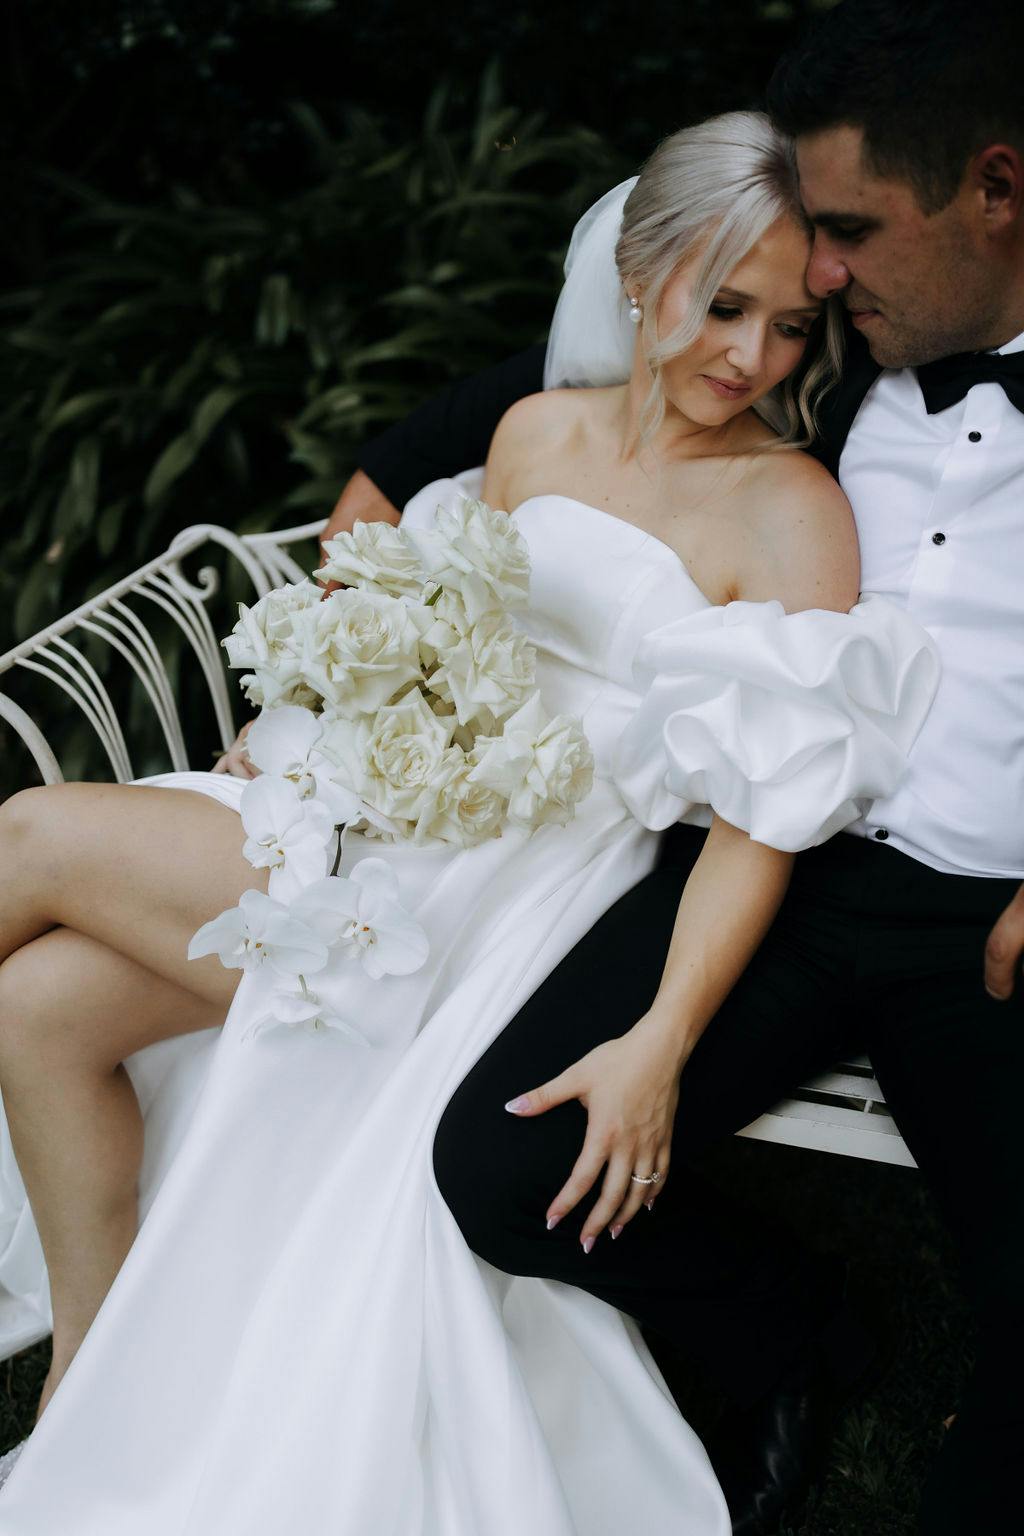 A bride in a white gown with puffy sleeves holds a bouquet of white flowers as she sits close to a groom in a black tuxedo on an outdoor bench. They are nestled together, sharing an intimate and tender moment.